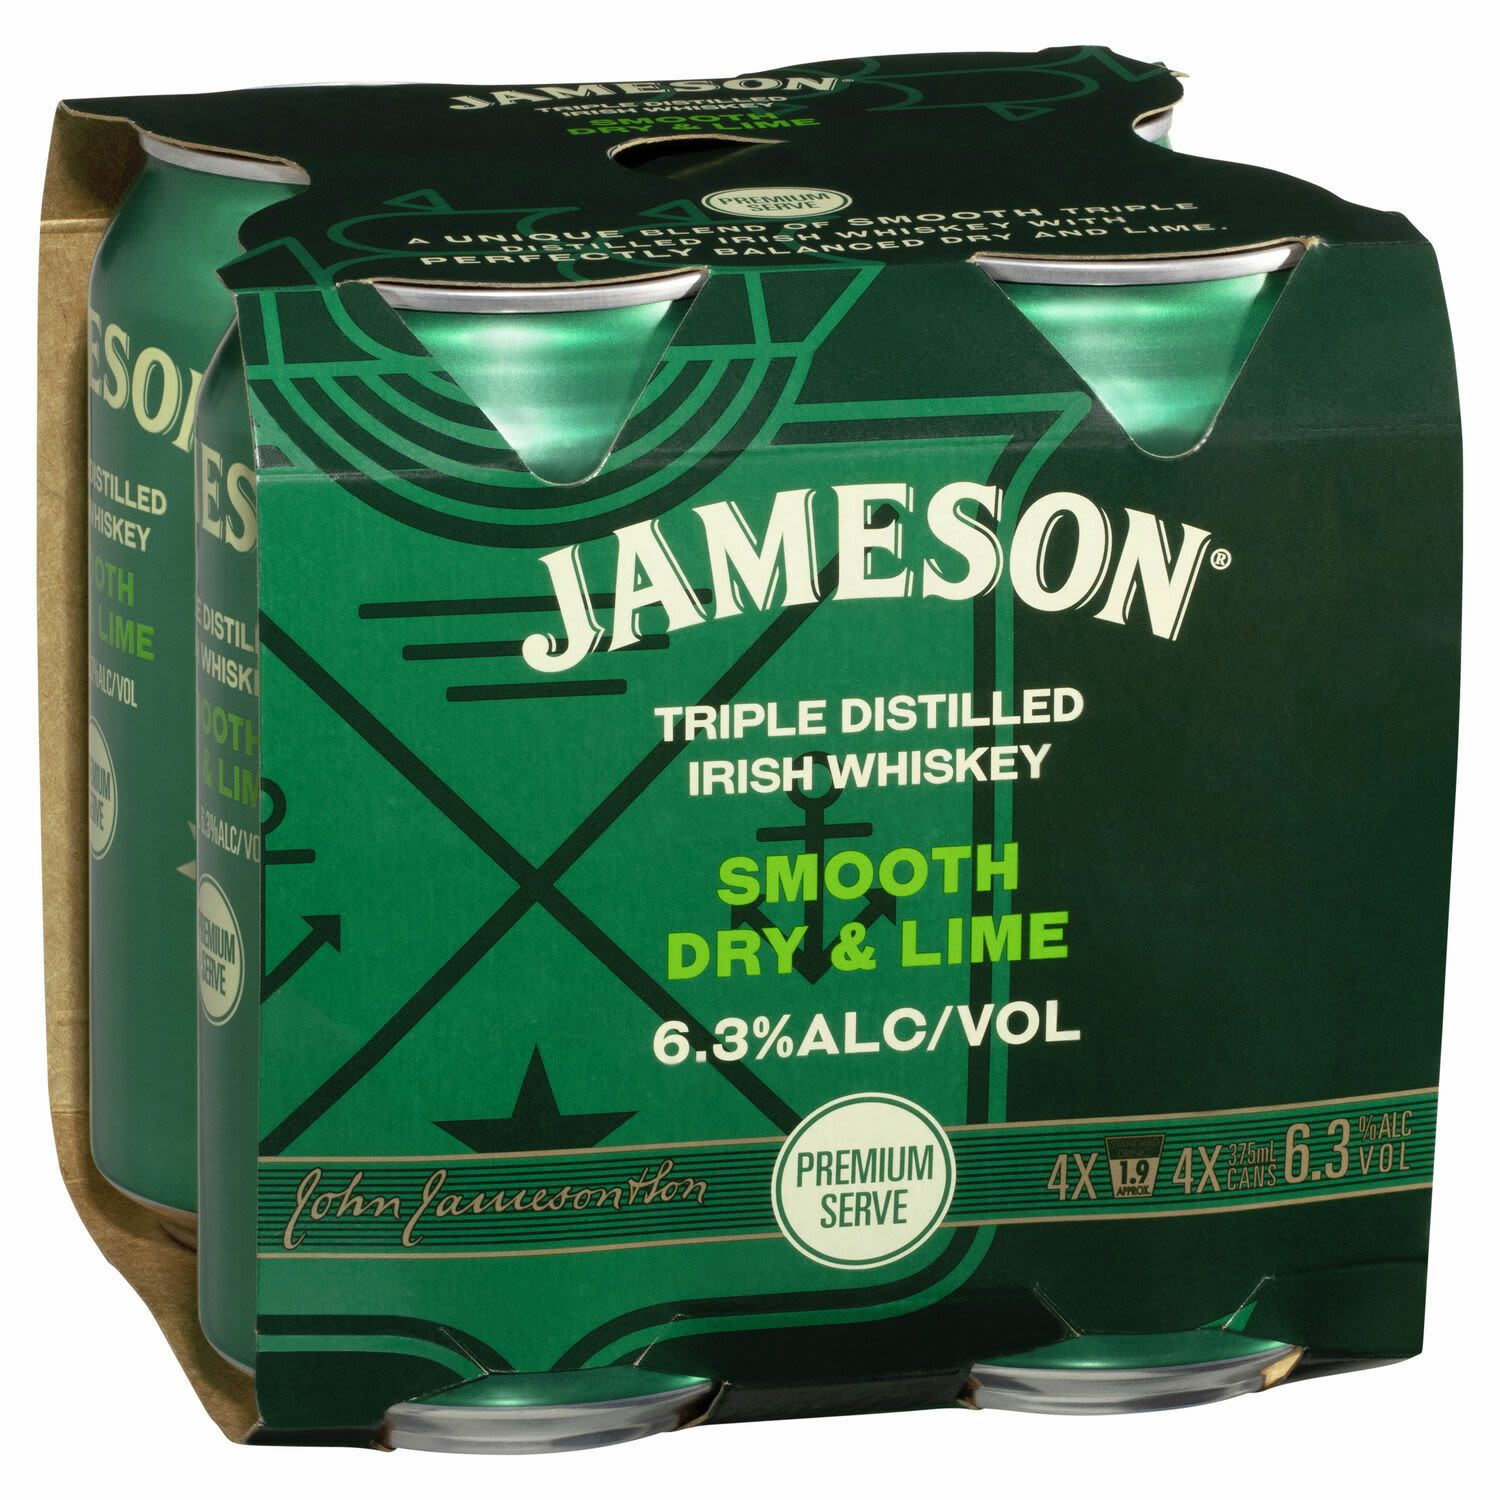 Jameson Irish Whiskey Dry & Lime 6.3% Can 375mL 4 Pack